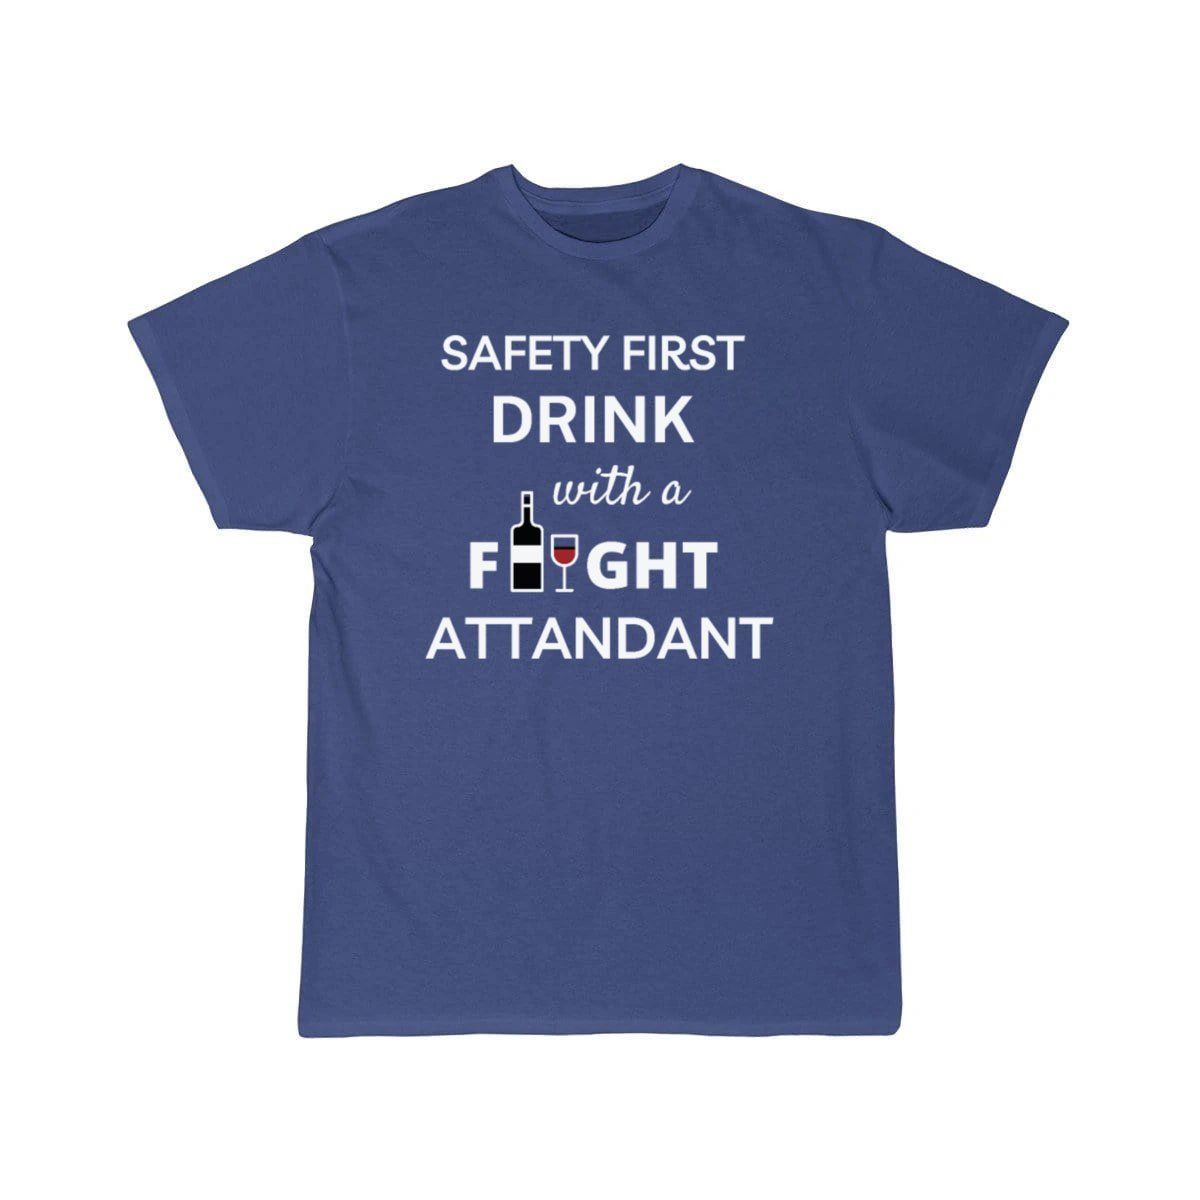 Safety First Drink With a Flight Attendant T-SHIRT THE AV8R